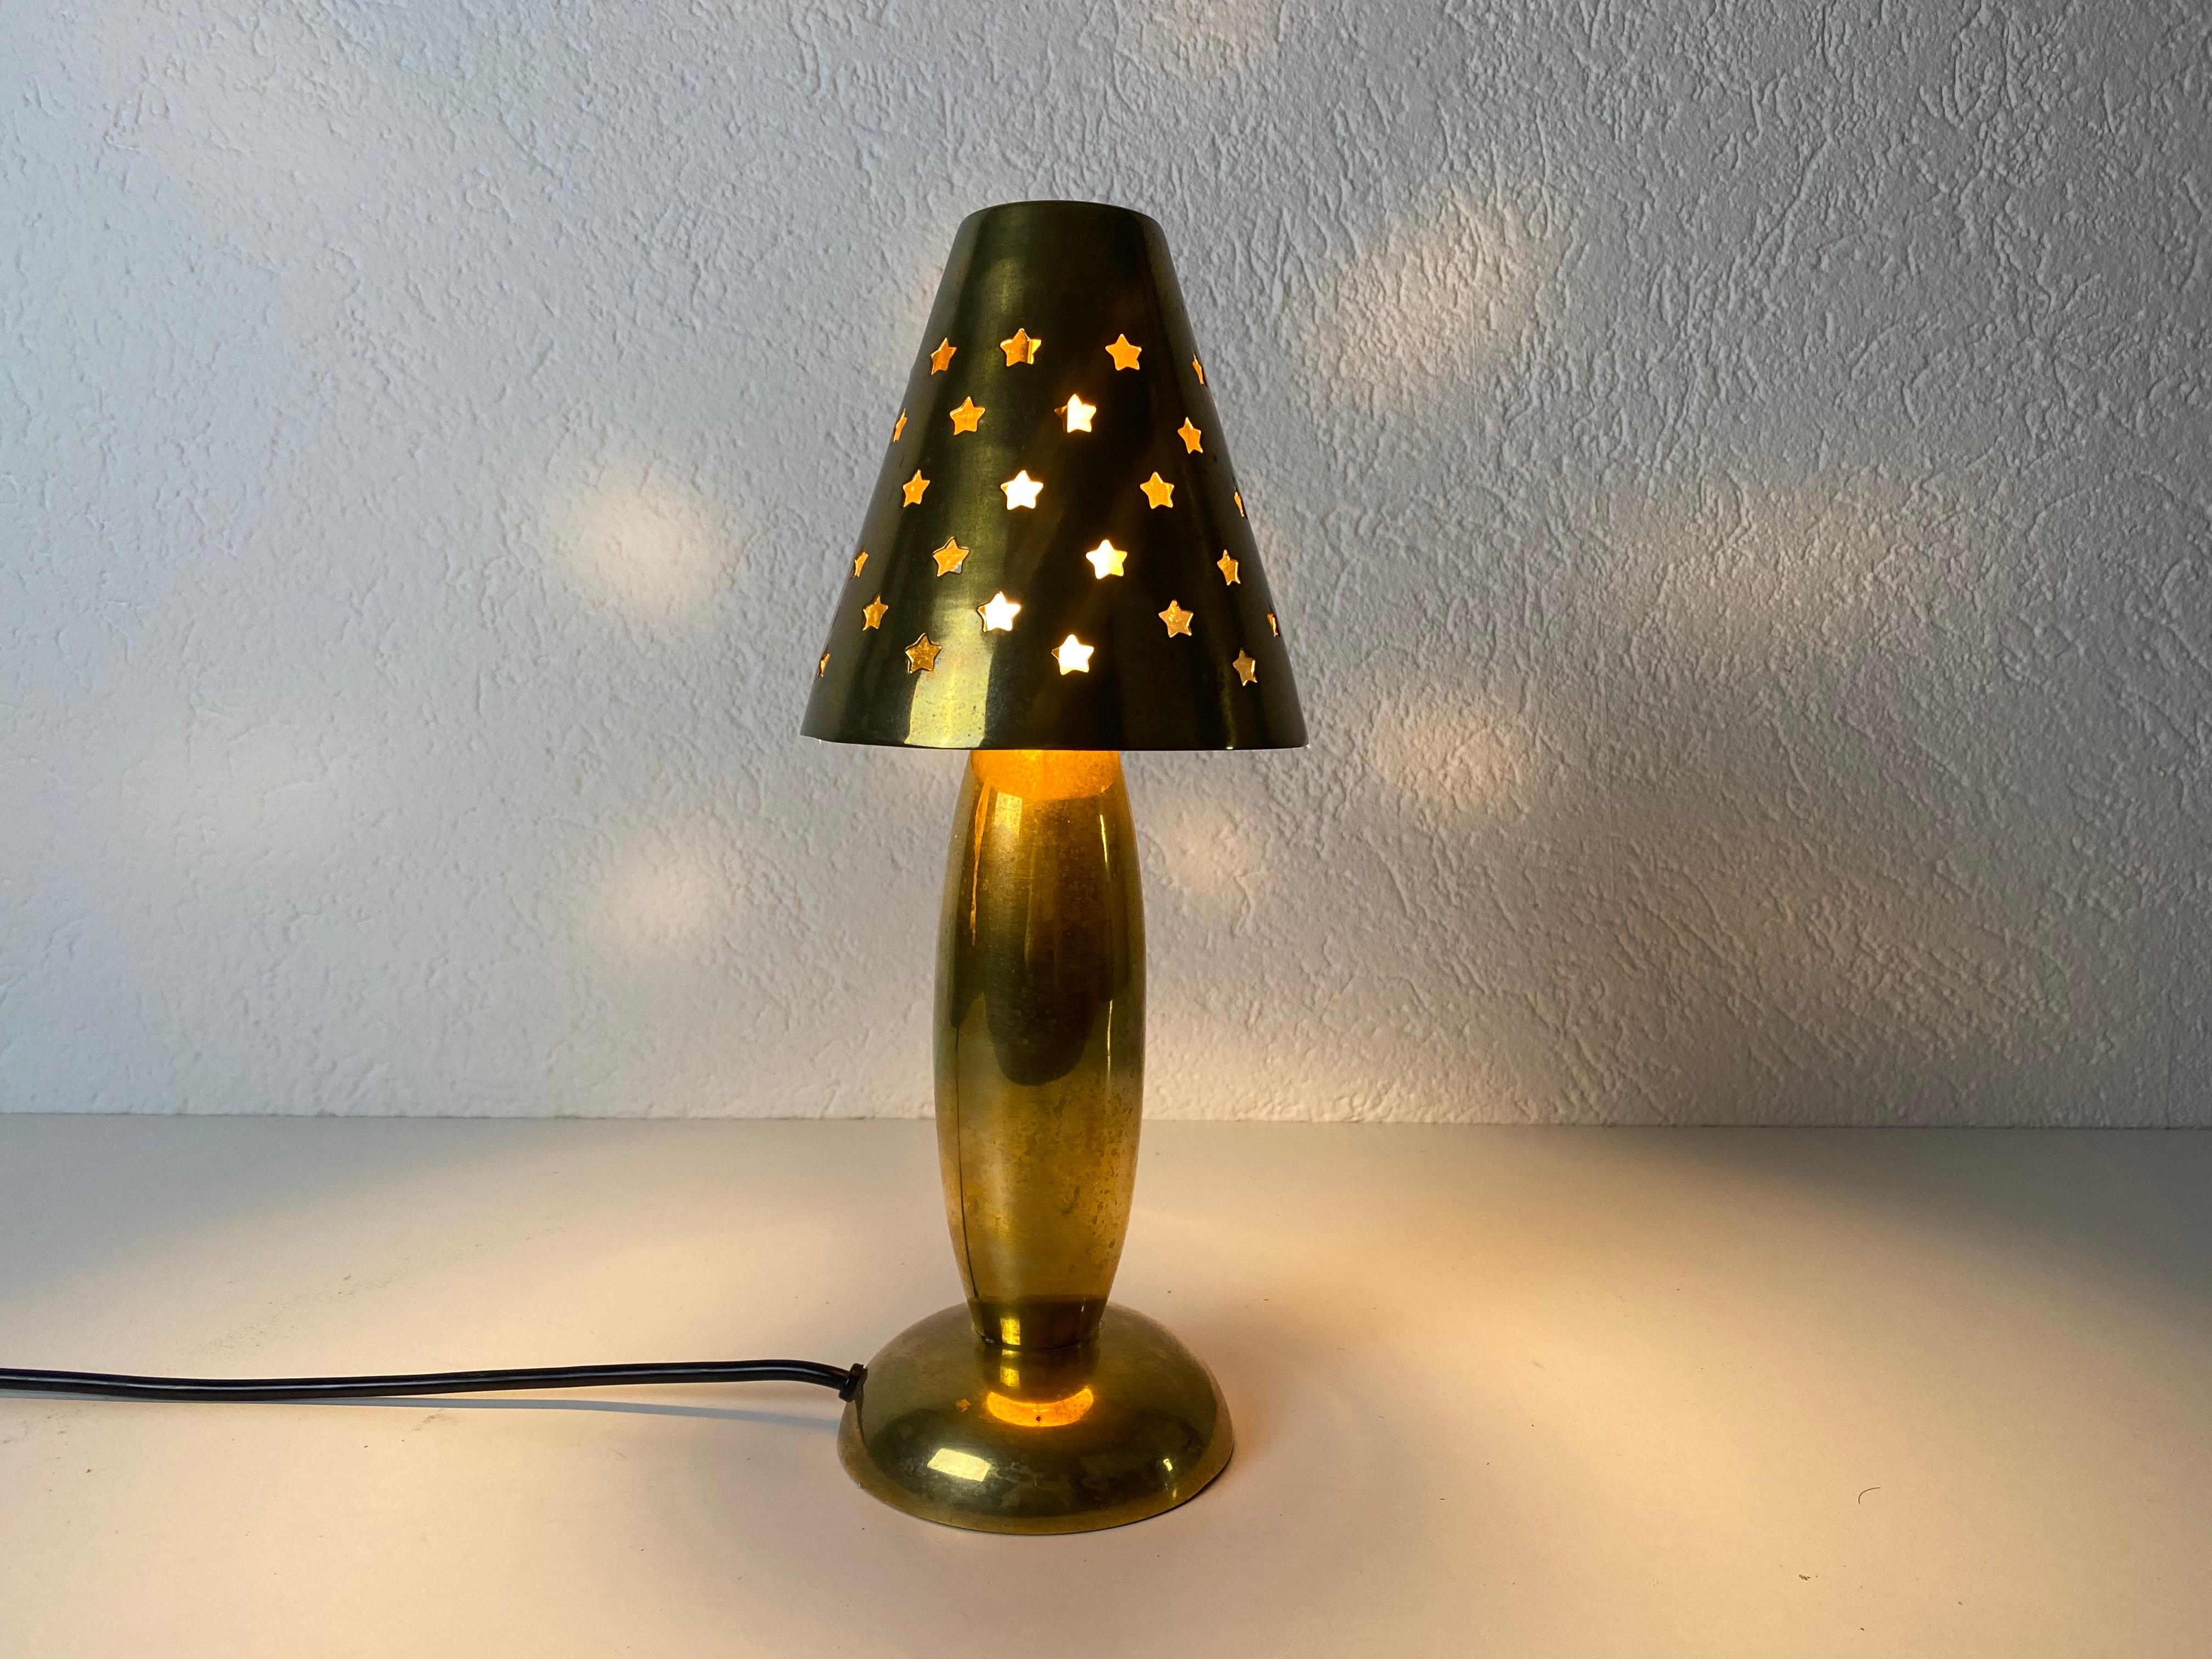 A table lamp made in the 1980s by Studio Lambert. Made by solid brass. 

The light requires one E14 light bulb. Works with both 120/220V. Good vintage condition.

Free worldwide express shipping.